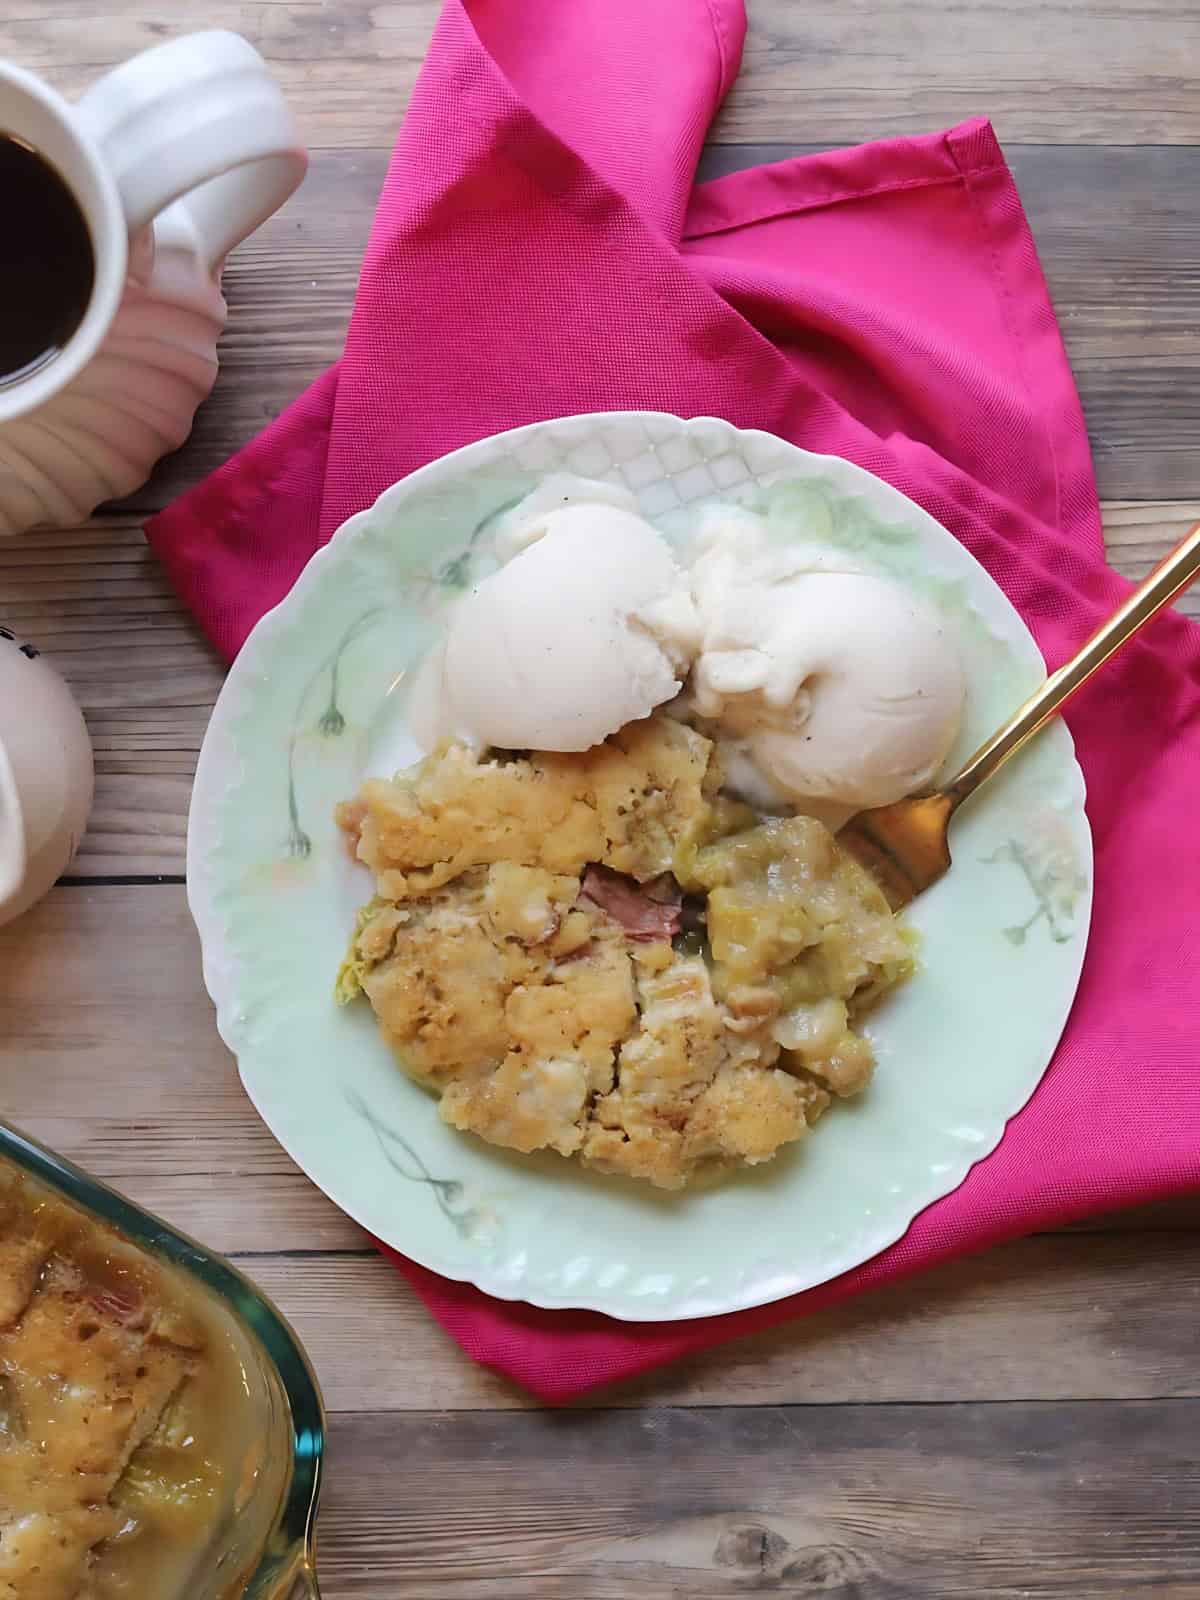 A serving of rhubarb pudding cake on a plate.